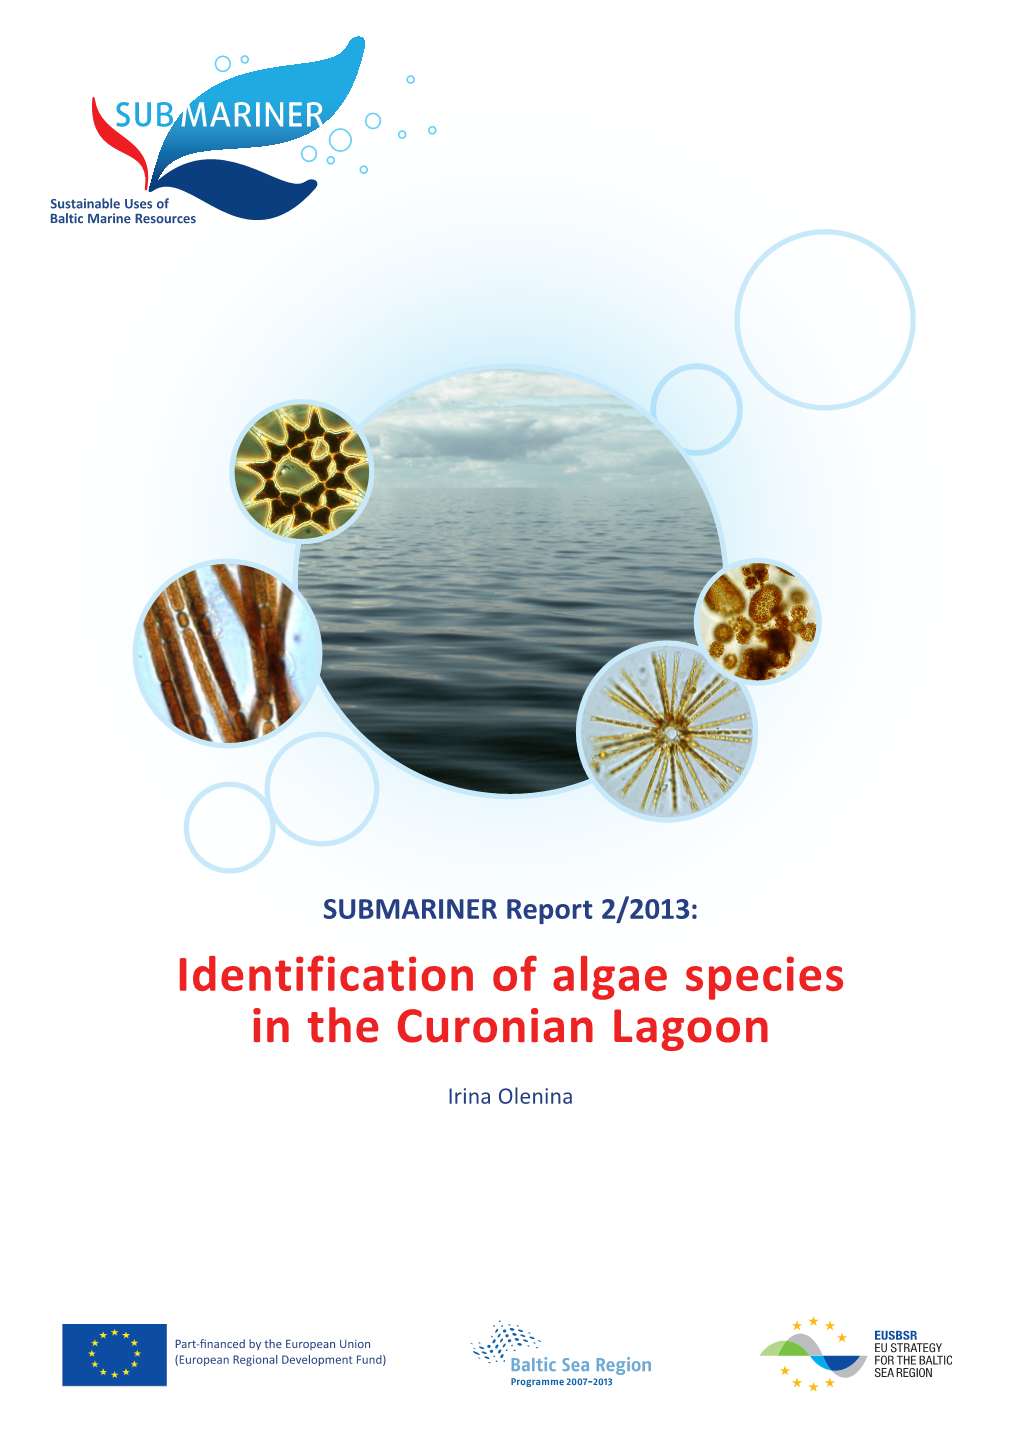 Identification of Algae Species in the Curonian Lagoon